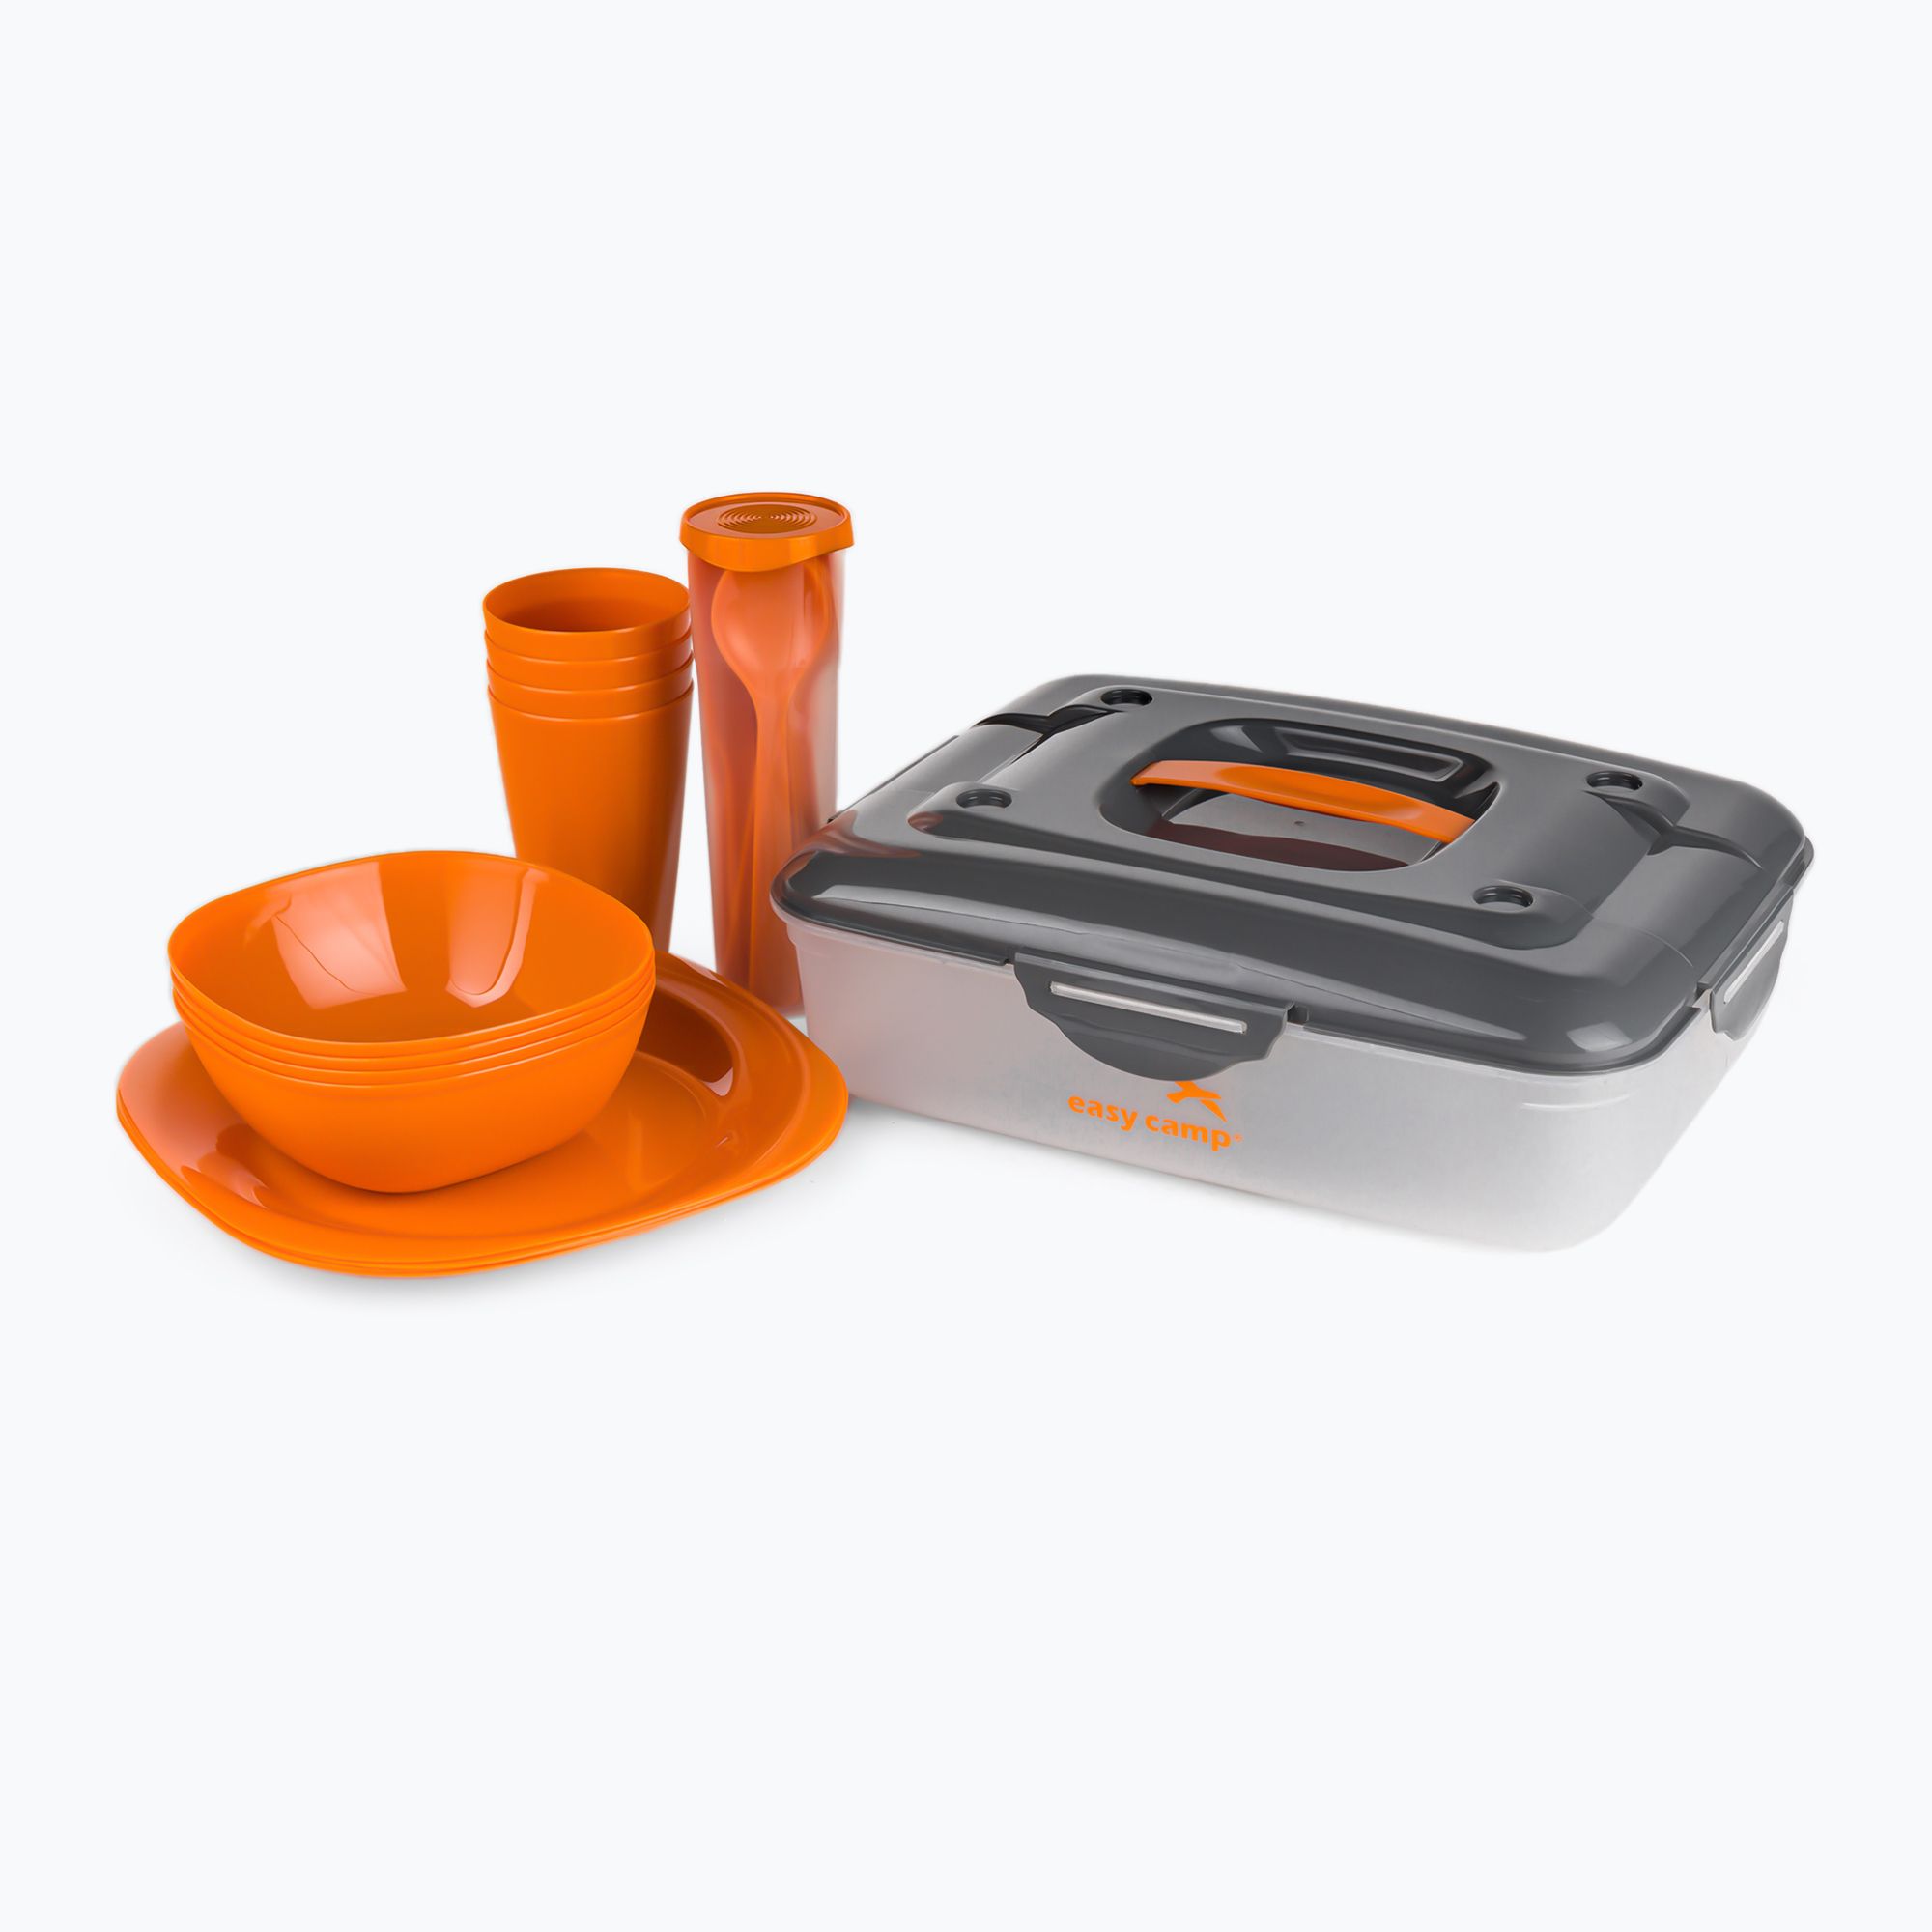 Easy Camp 680162 4 cookware hiking Picnic orange Persons Cerf Box set